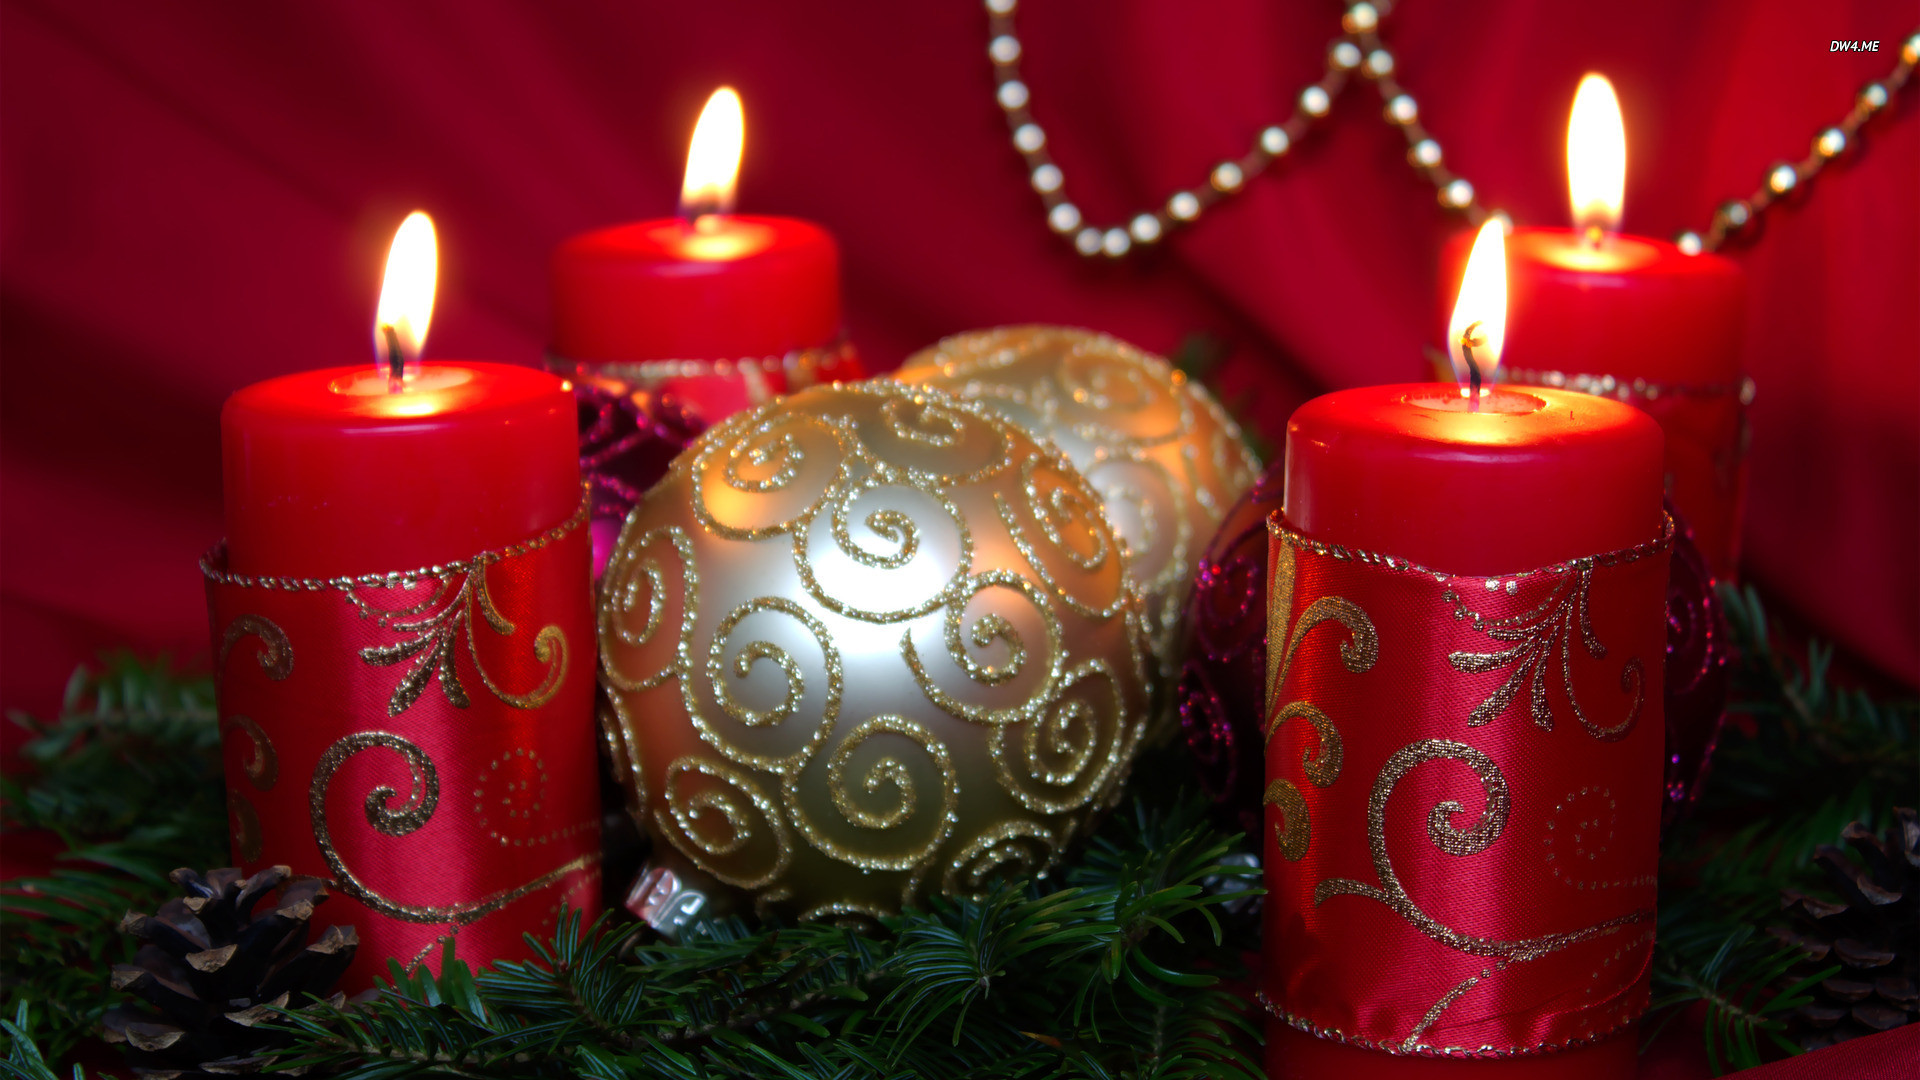 1920x1080 Filename: 1050-advent-candles--photography-wallpaper.jpg